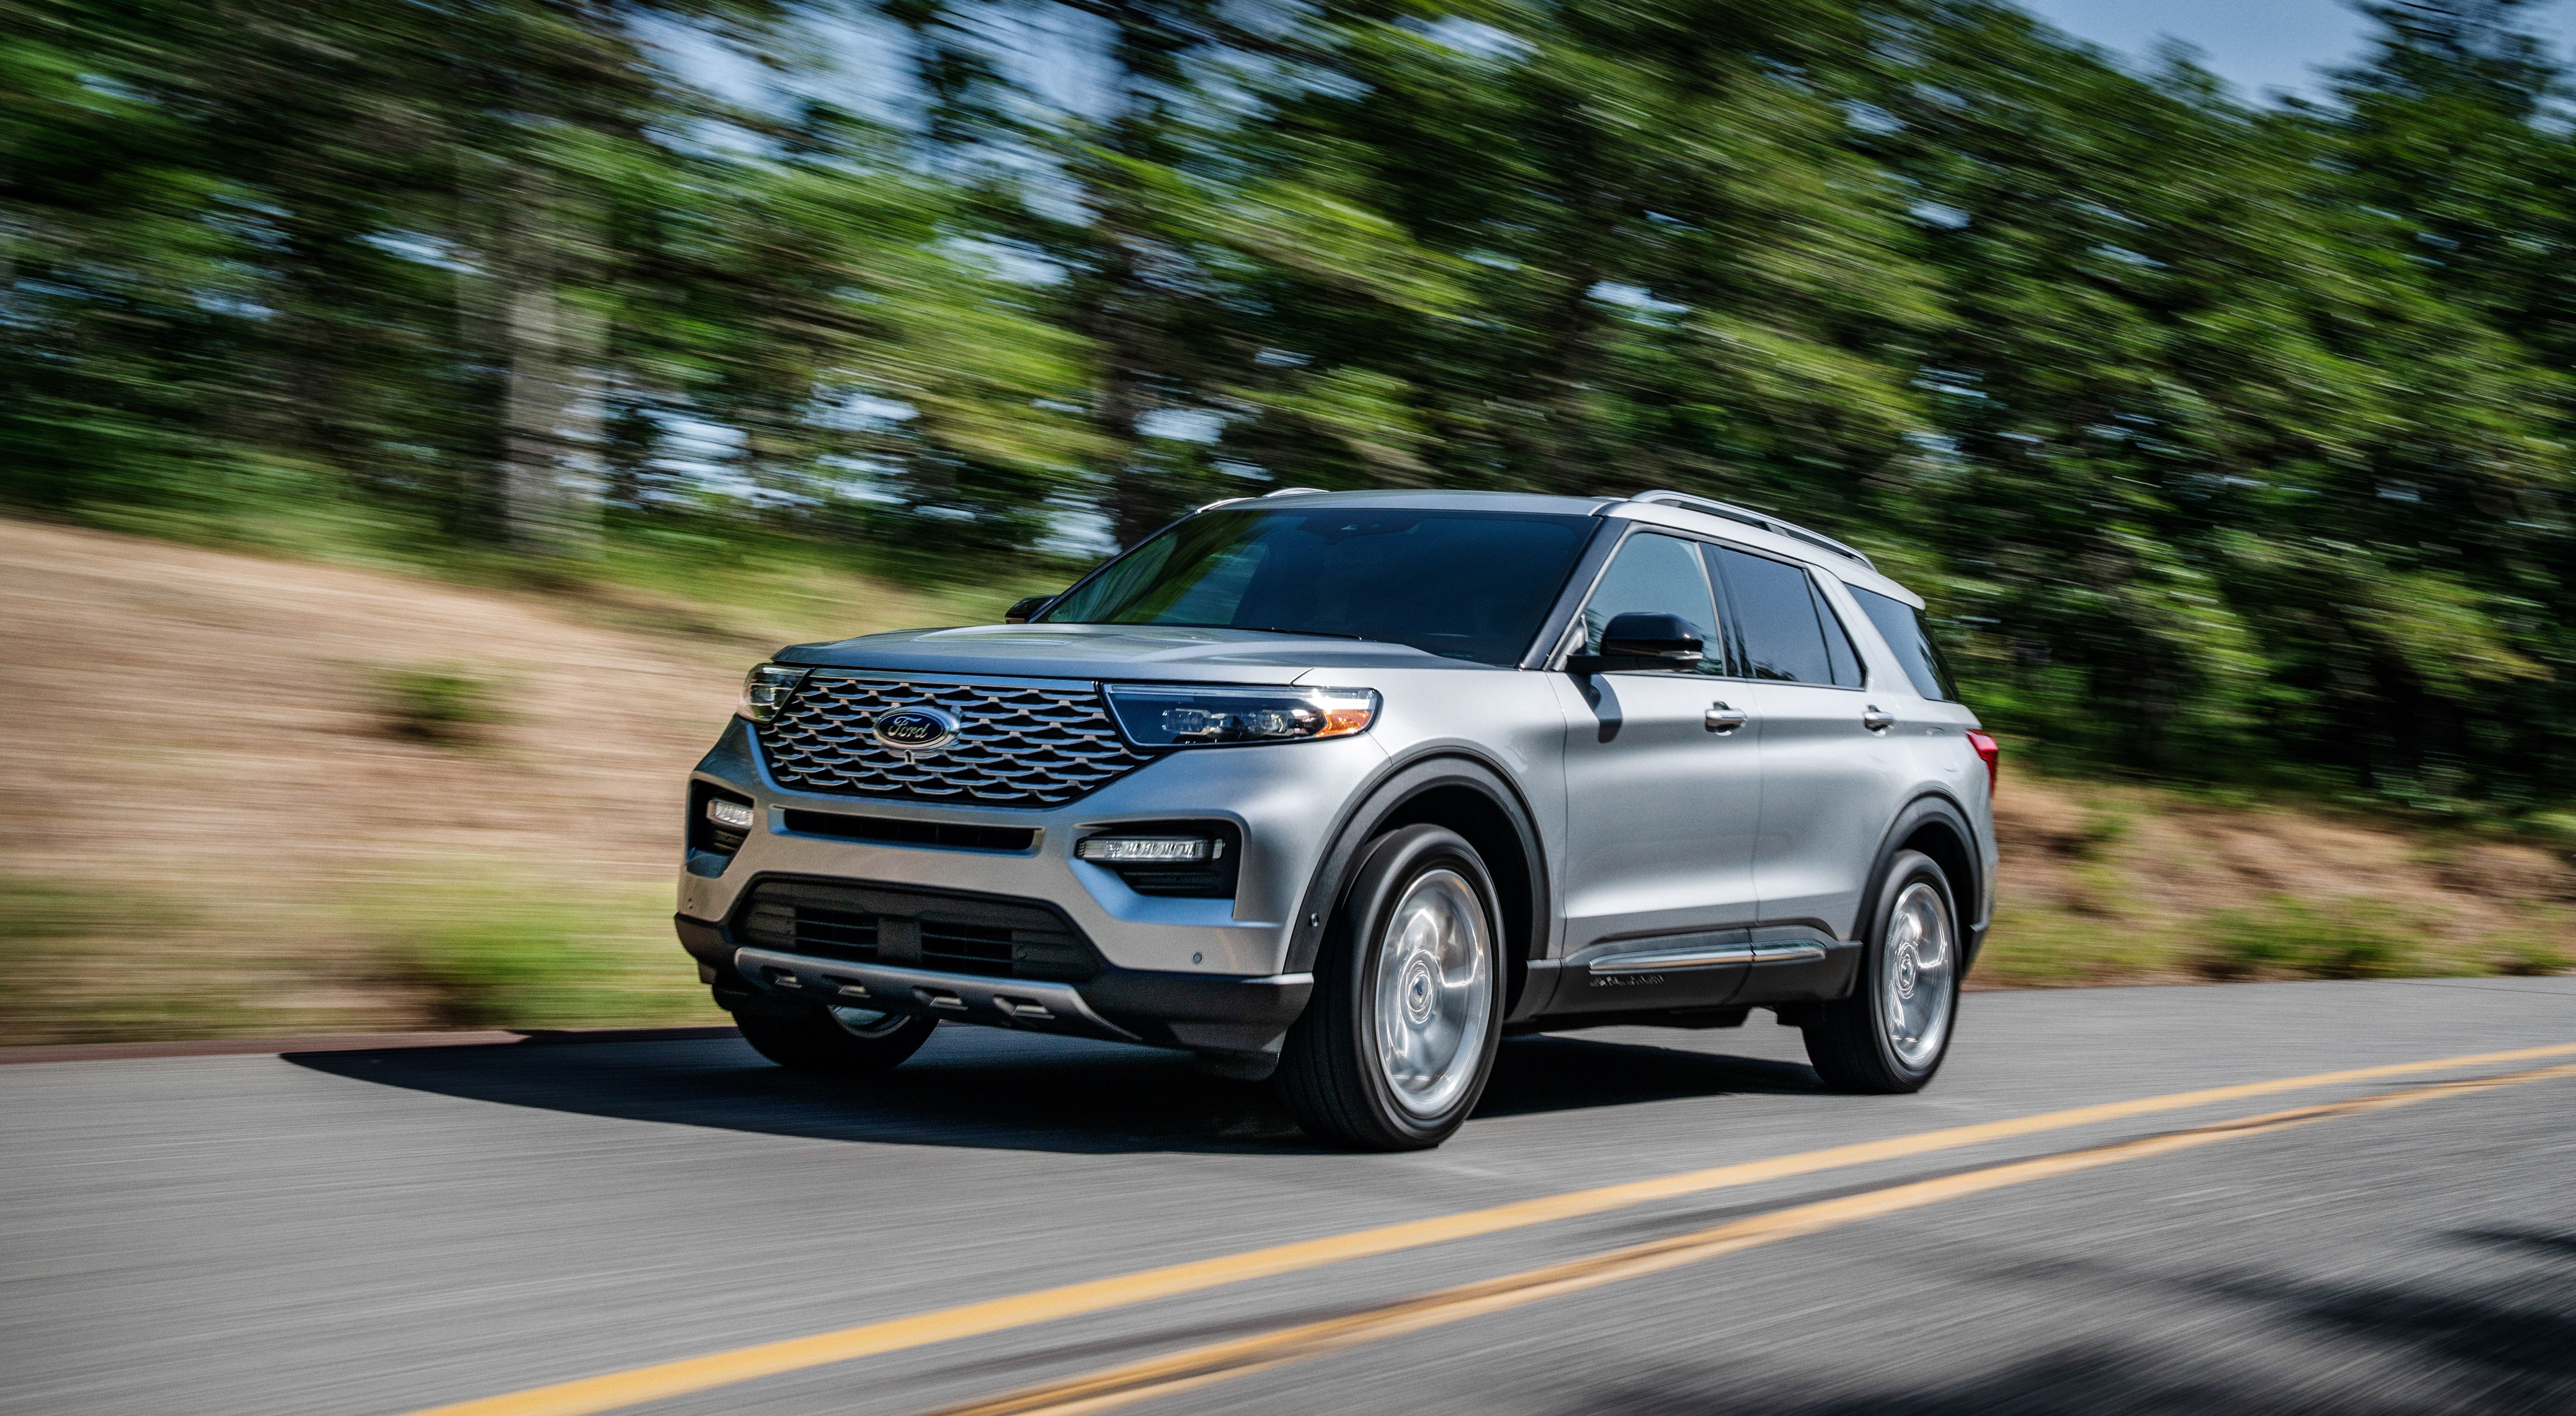 Comments on: The 2020 Ford Explorer Is a Huge Improvement ...